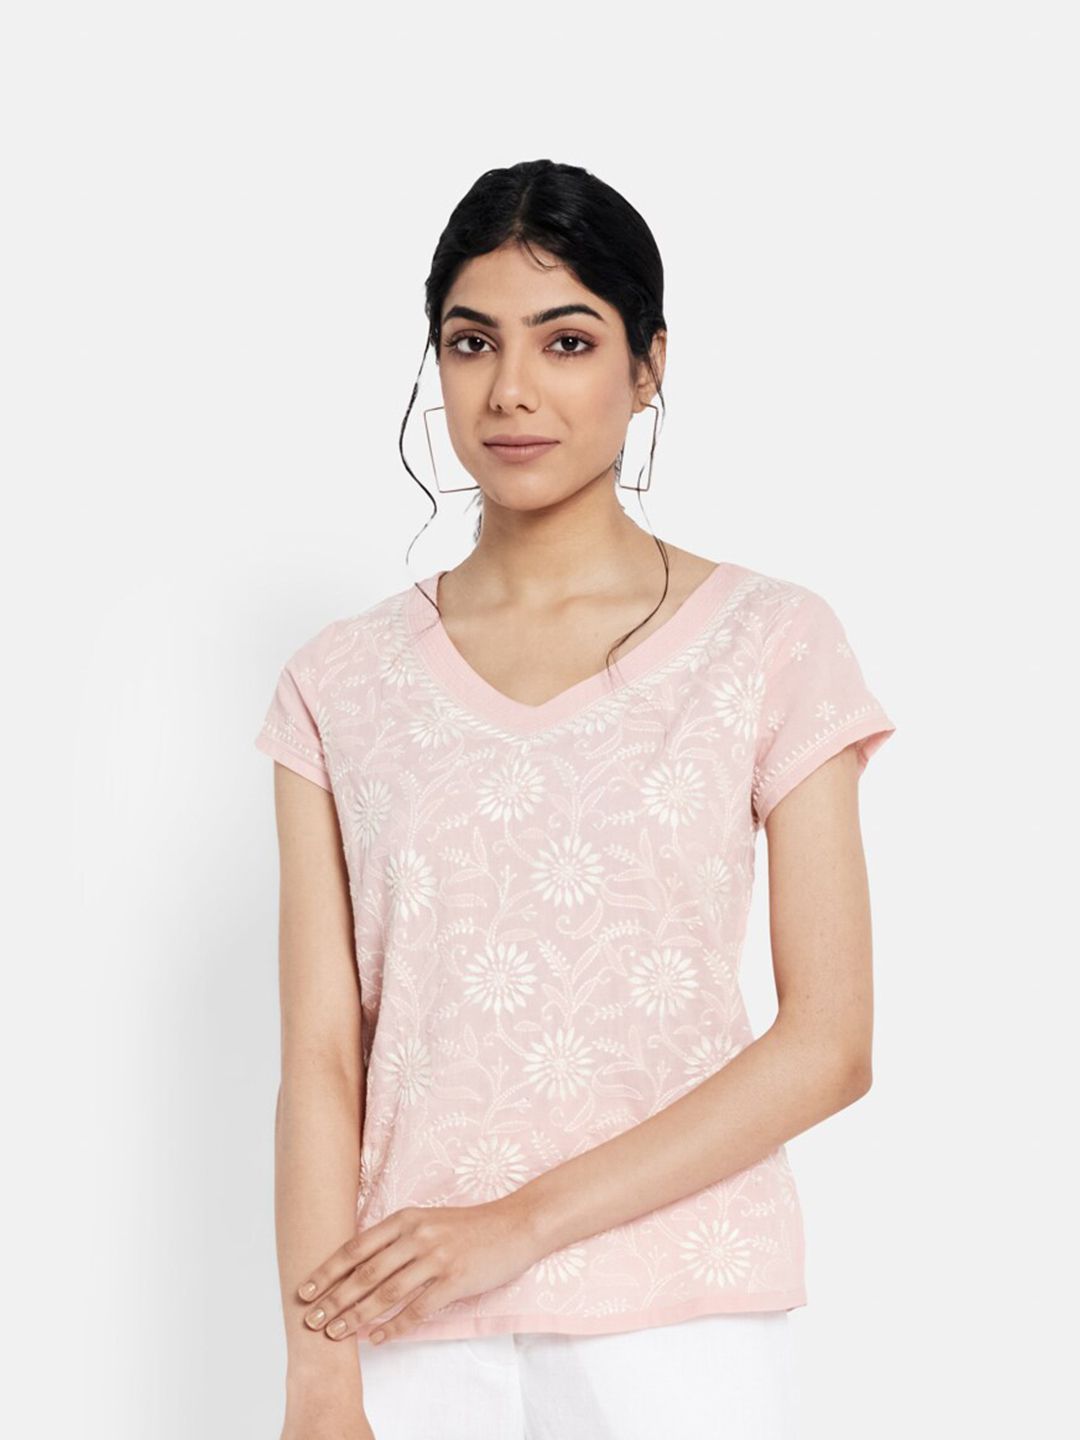 Fabindia Women Pink & White Floral Embroidered Pure Cotton Chikankari Top Price in India